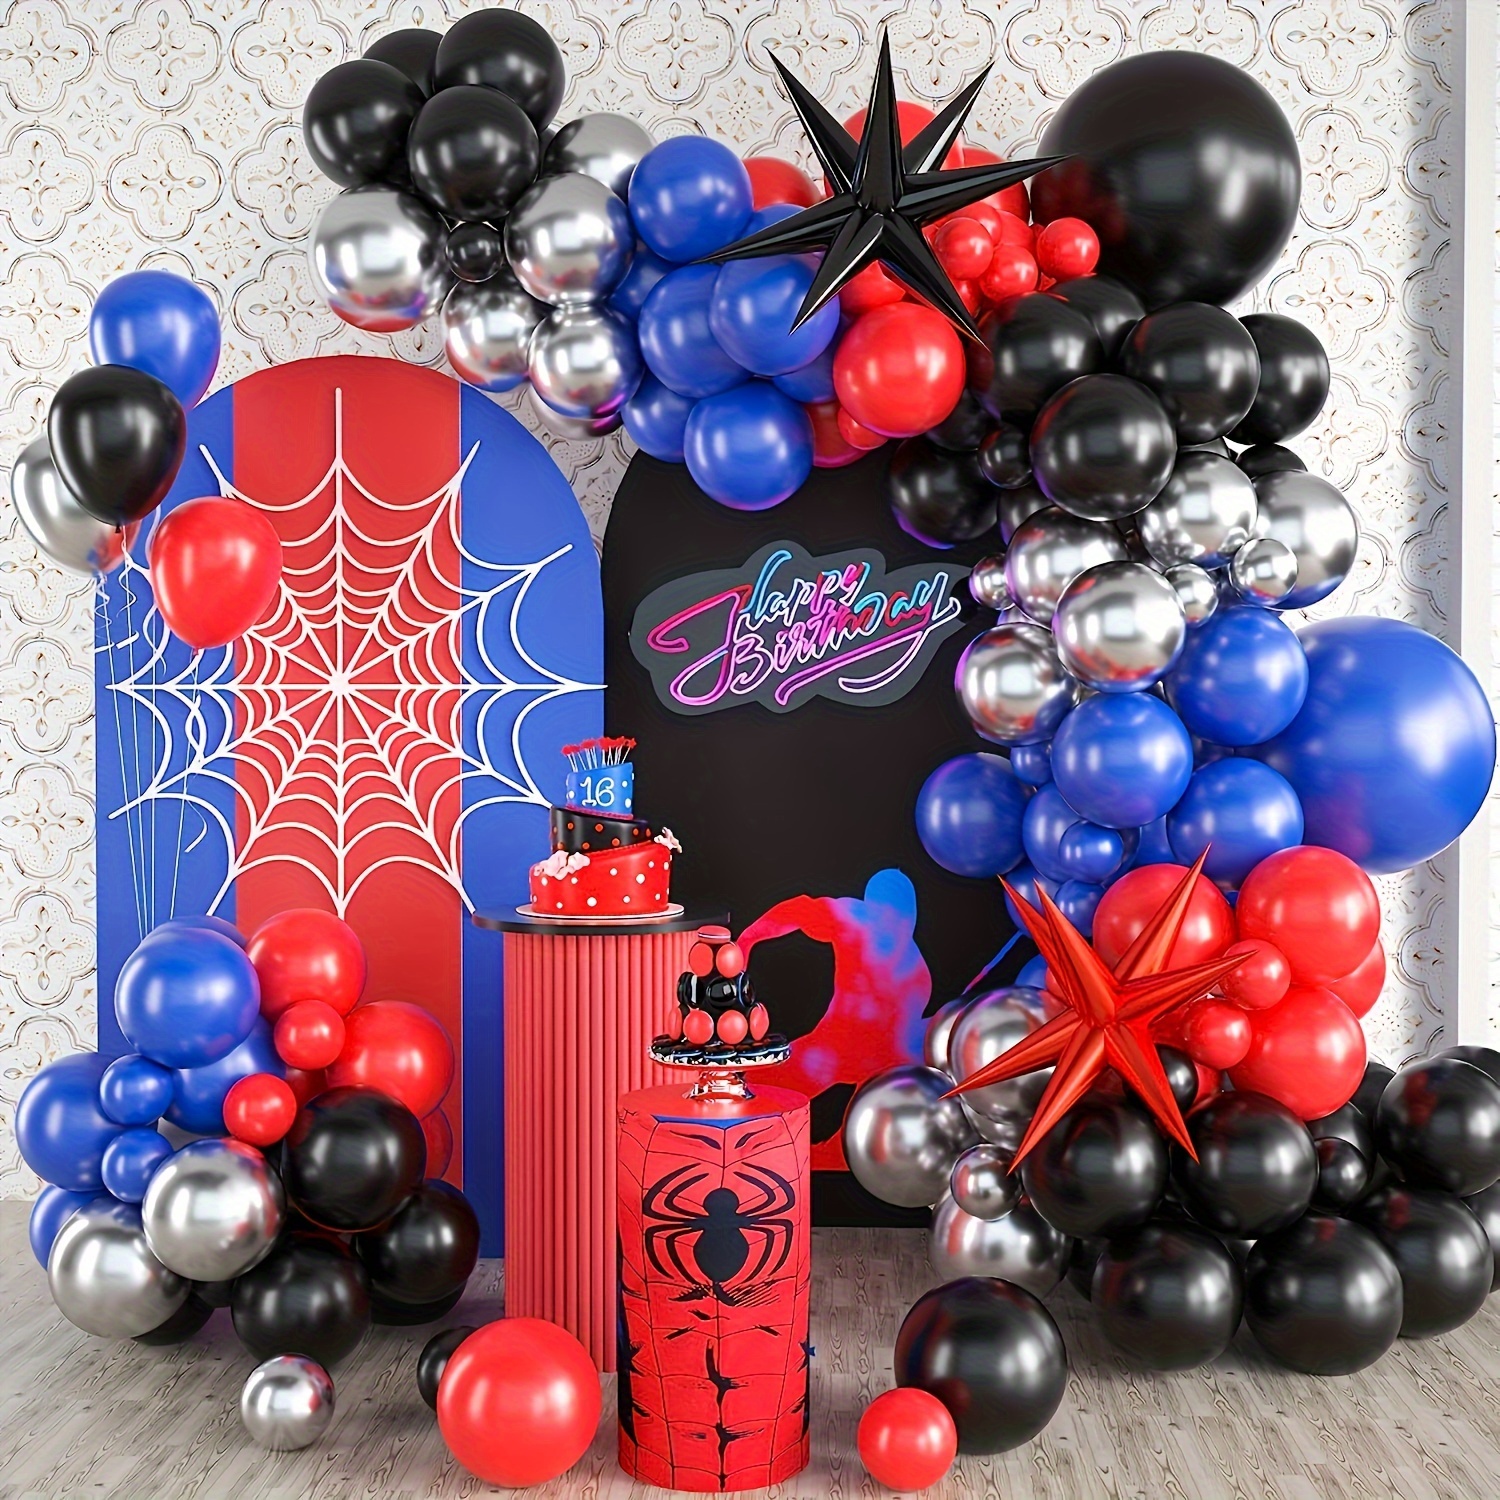 

stretch-fit Arch" 121-piece Spider Web Balloon Garland Kit - Vibrant & Durable Birthday Decor With Arch, Red/blue/black Latex & Foil Balloons For Ages 14+